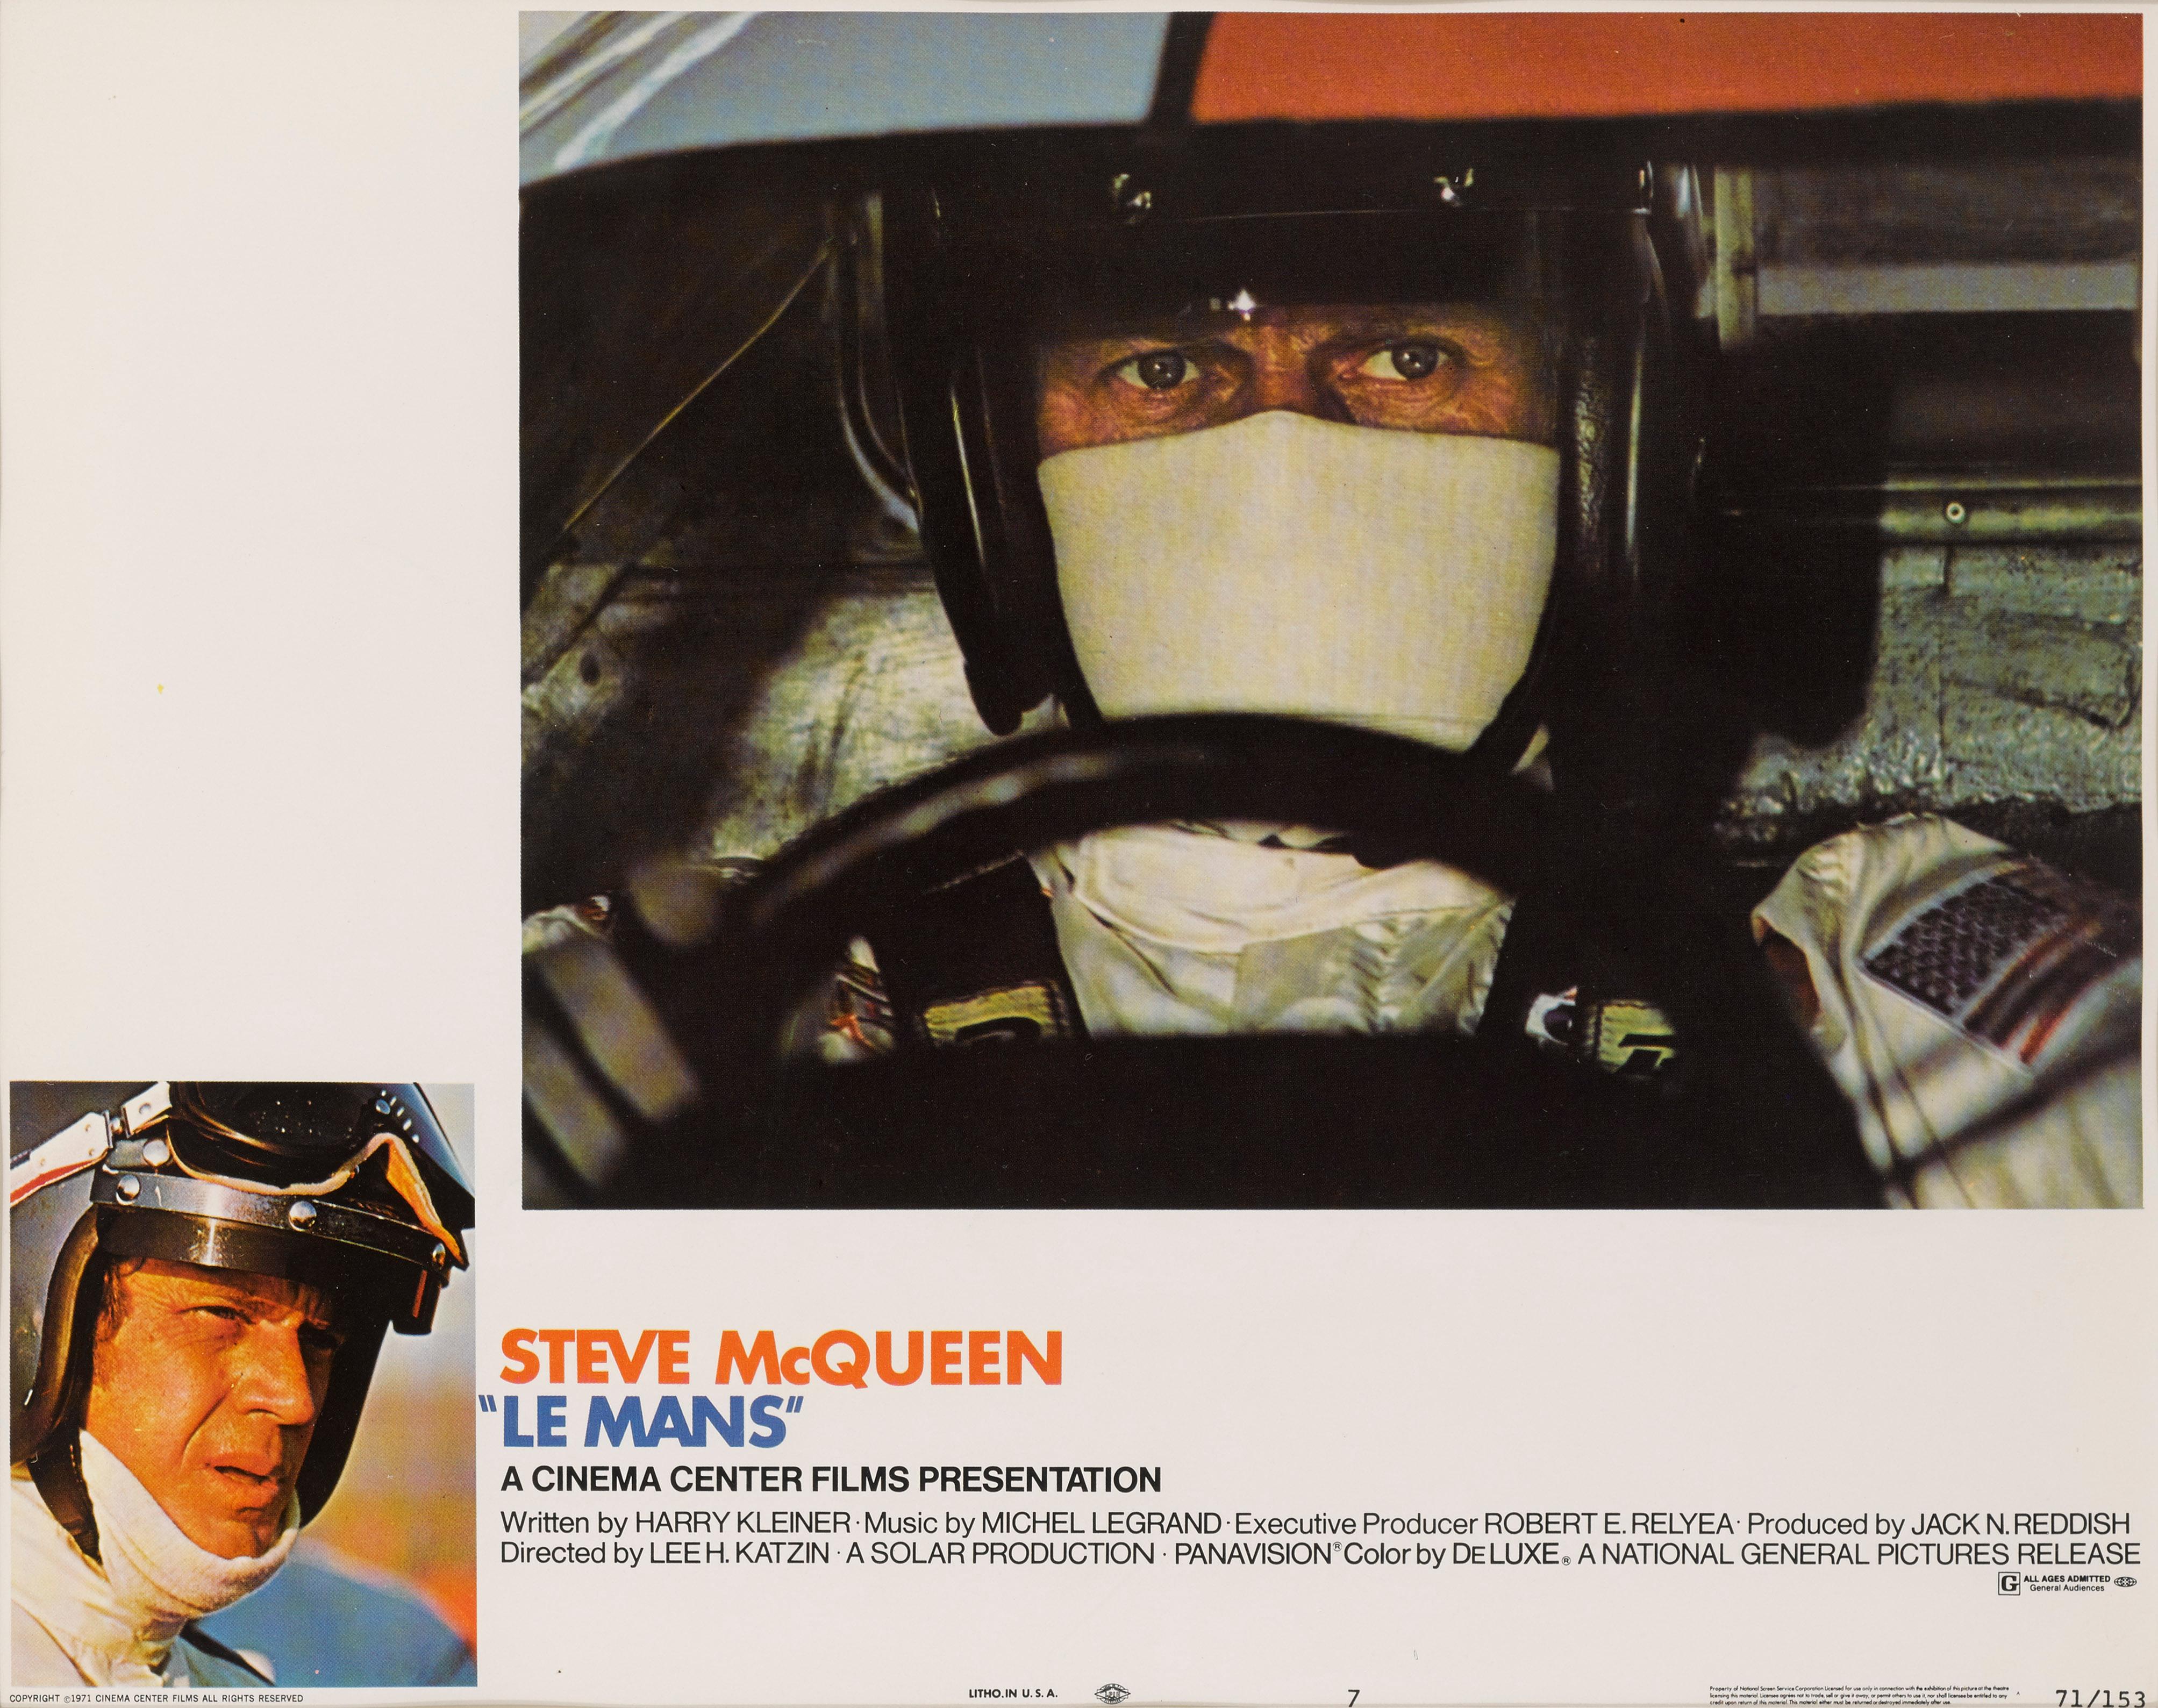 Original US Lobby card for Steve McQueen's 1971 film Le Mans. This card shows him driving the Porsche 908 K Flunder Spyder which was his personal car. This film, directed by Lee H. Katzin, portrays the famous Le Mans 24 Hour endurance motor race,